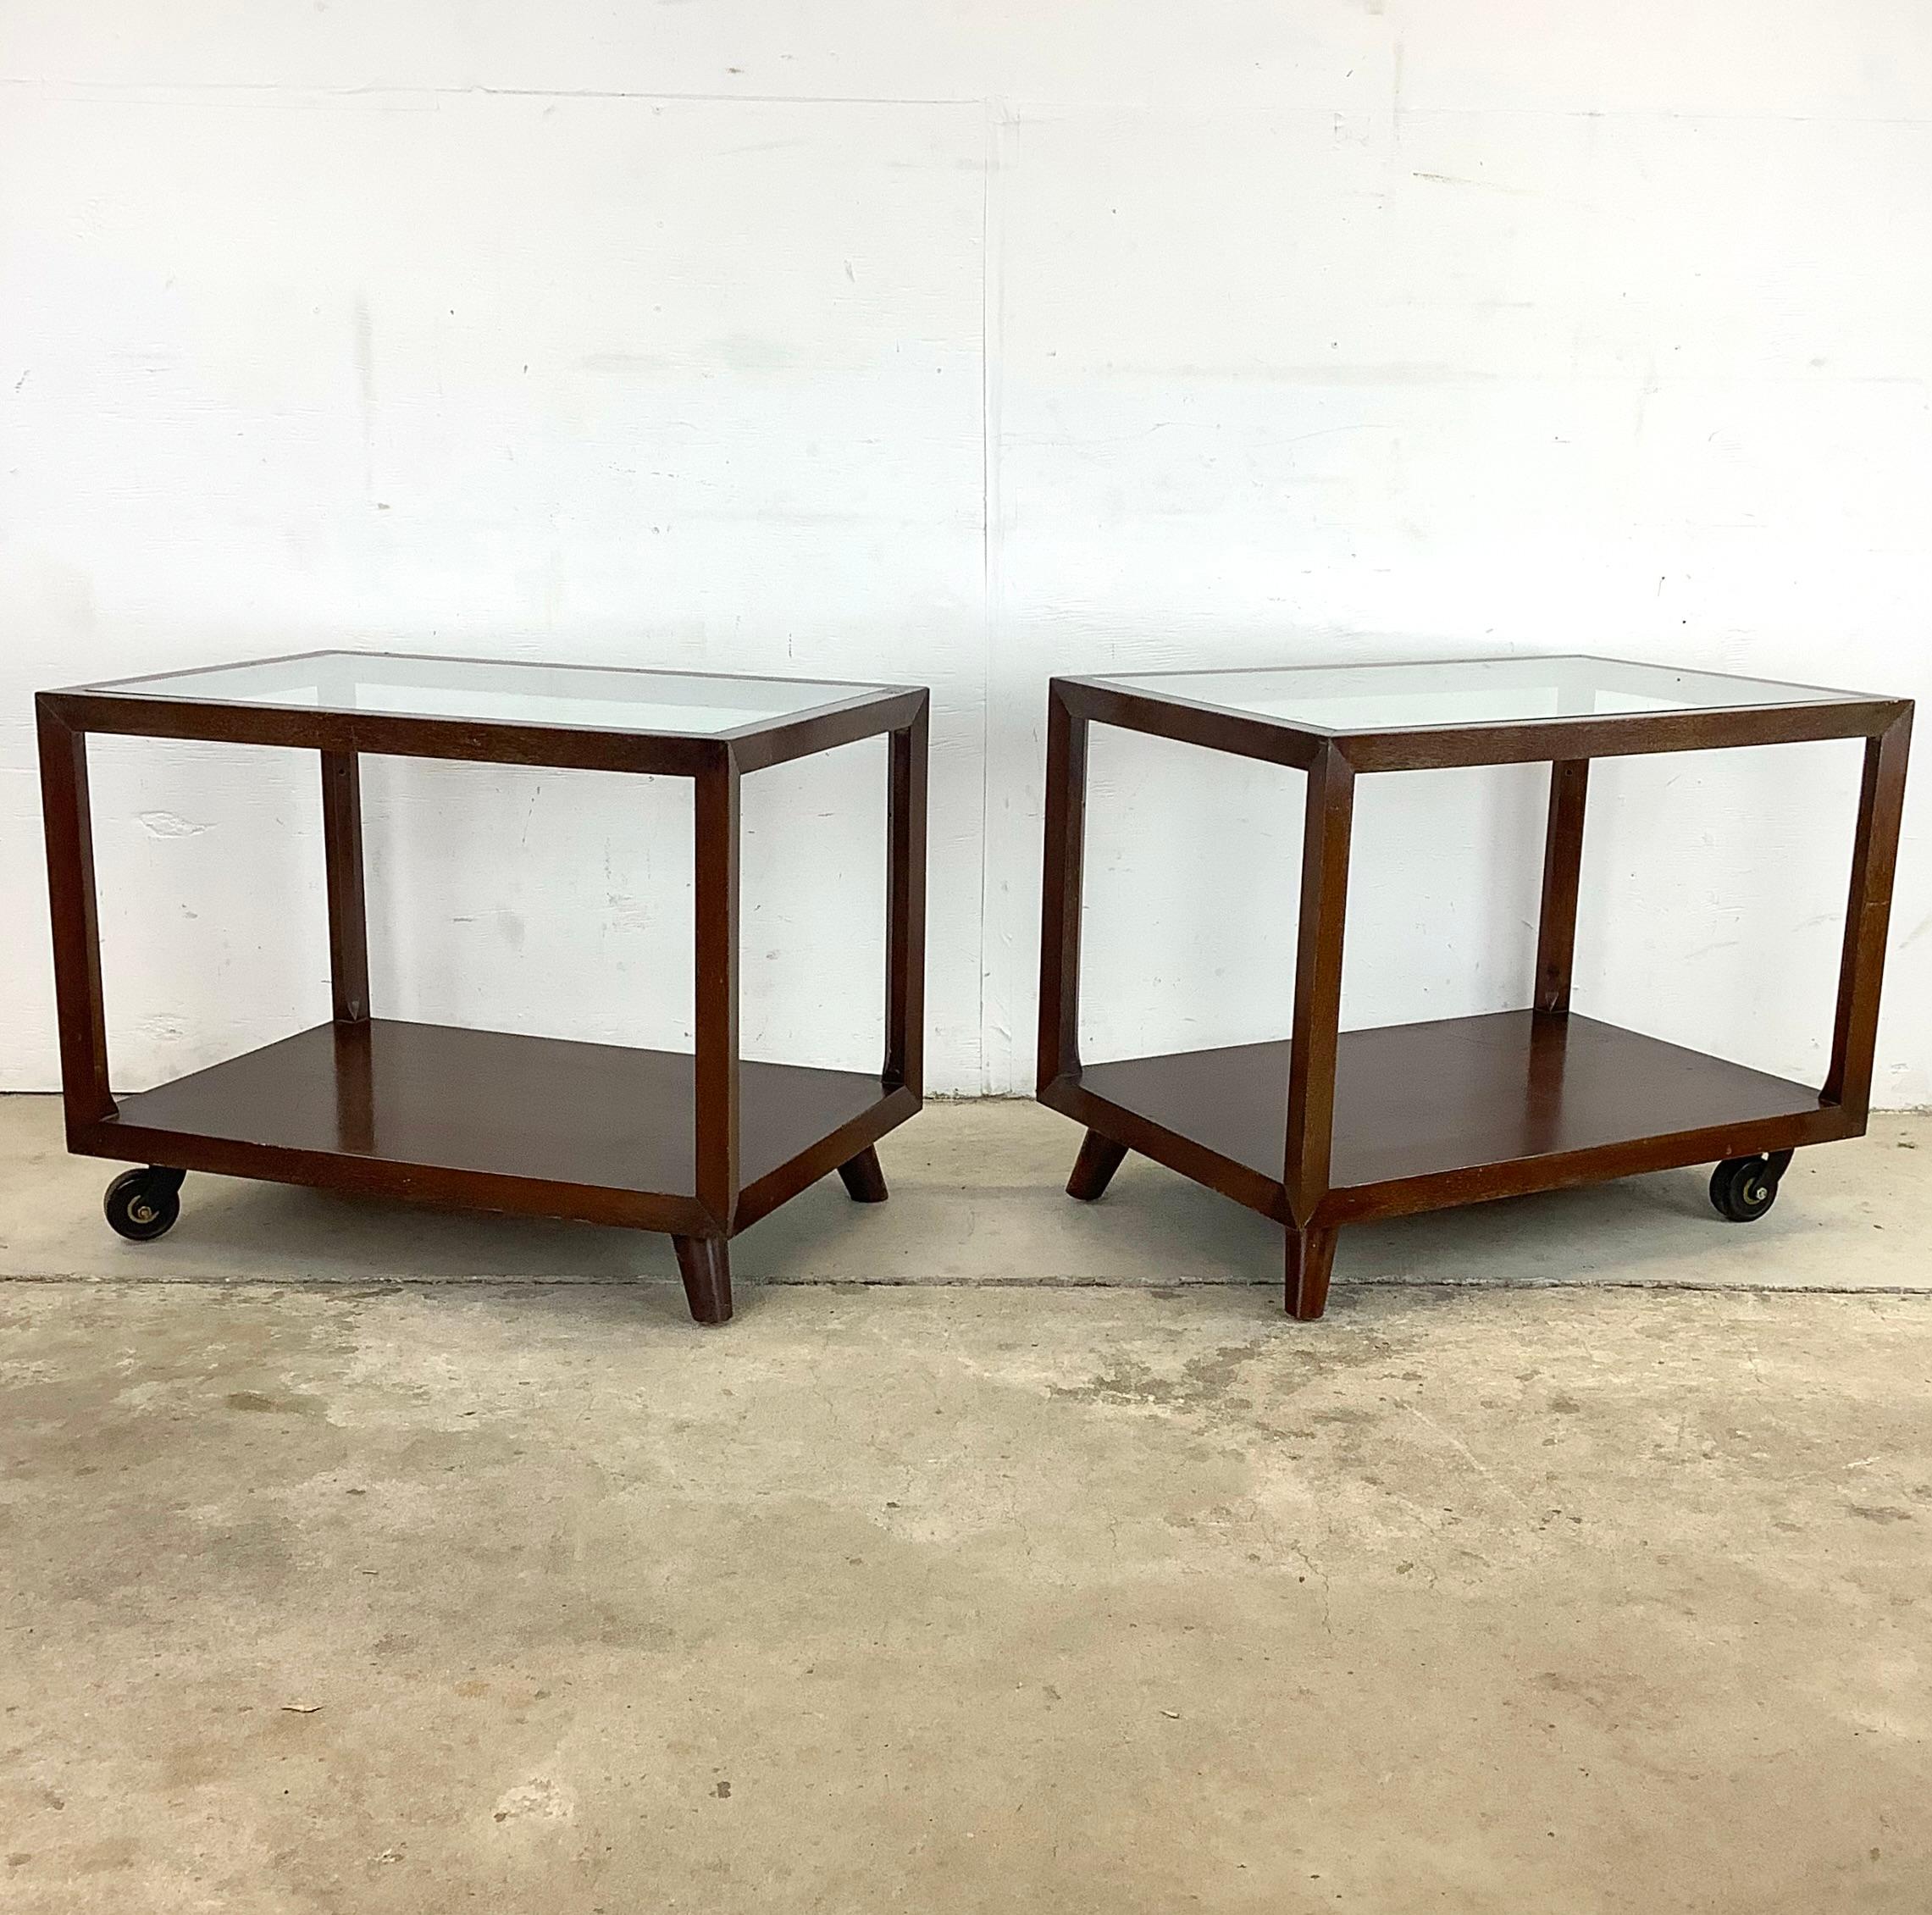 Looking for a pair of mid-century side tables that will add some Mid-Century Modern flair to your living space? Look no further than these rectangular glass top walnut end tables!

Crafted from quality materials and expertly designed, these end